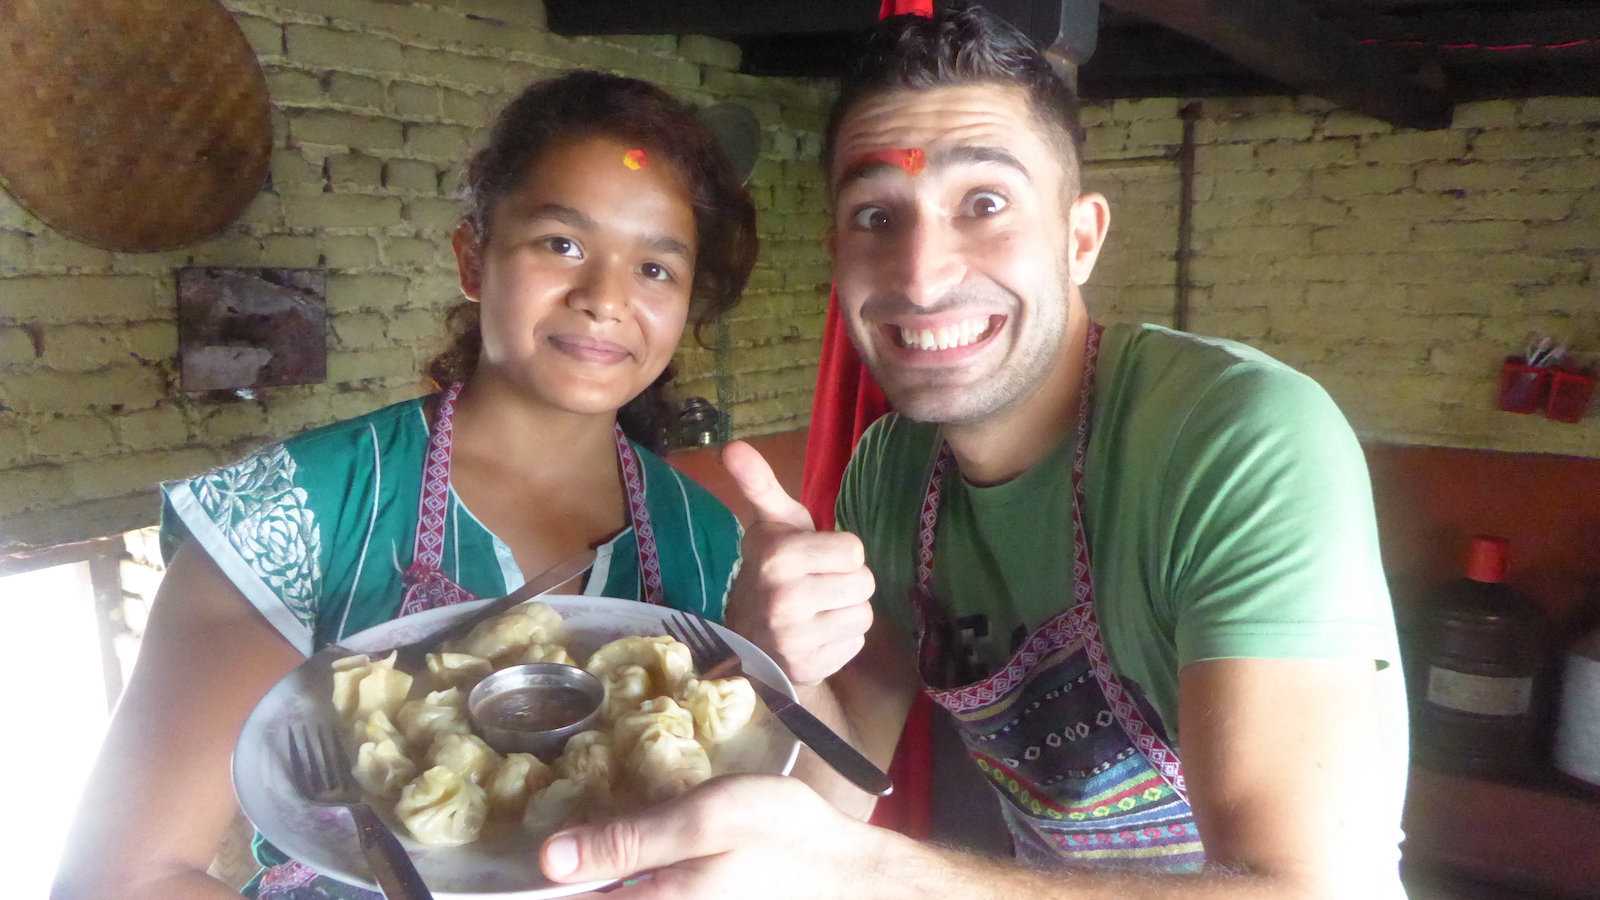 Momos are a traditional type of dumpling from Nepal, and they're delicious!